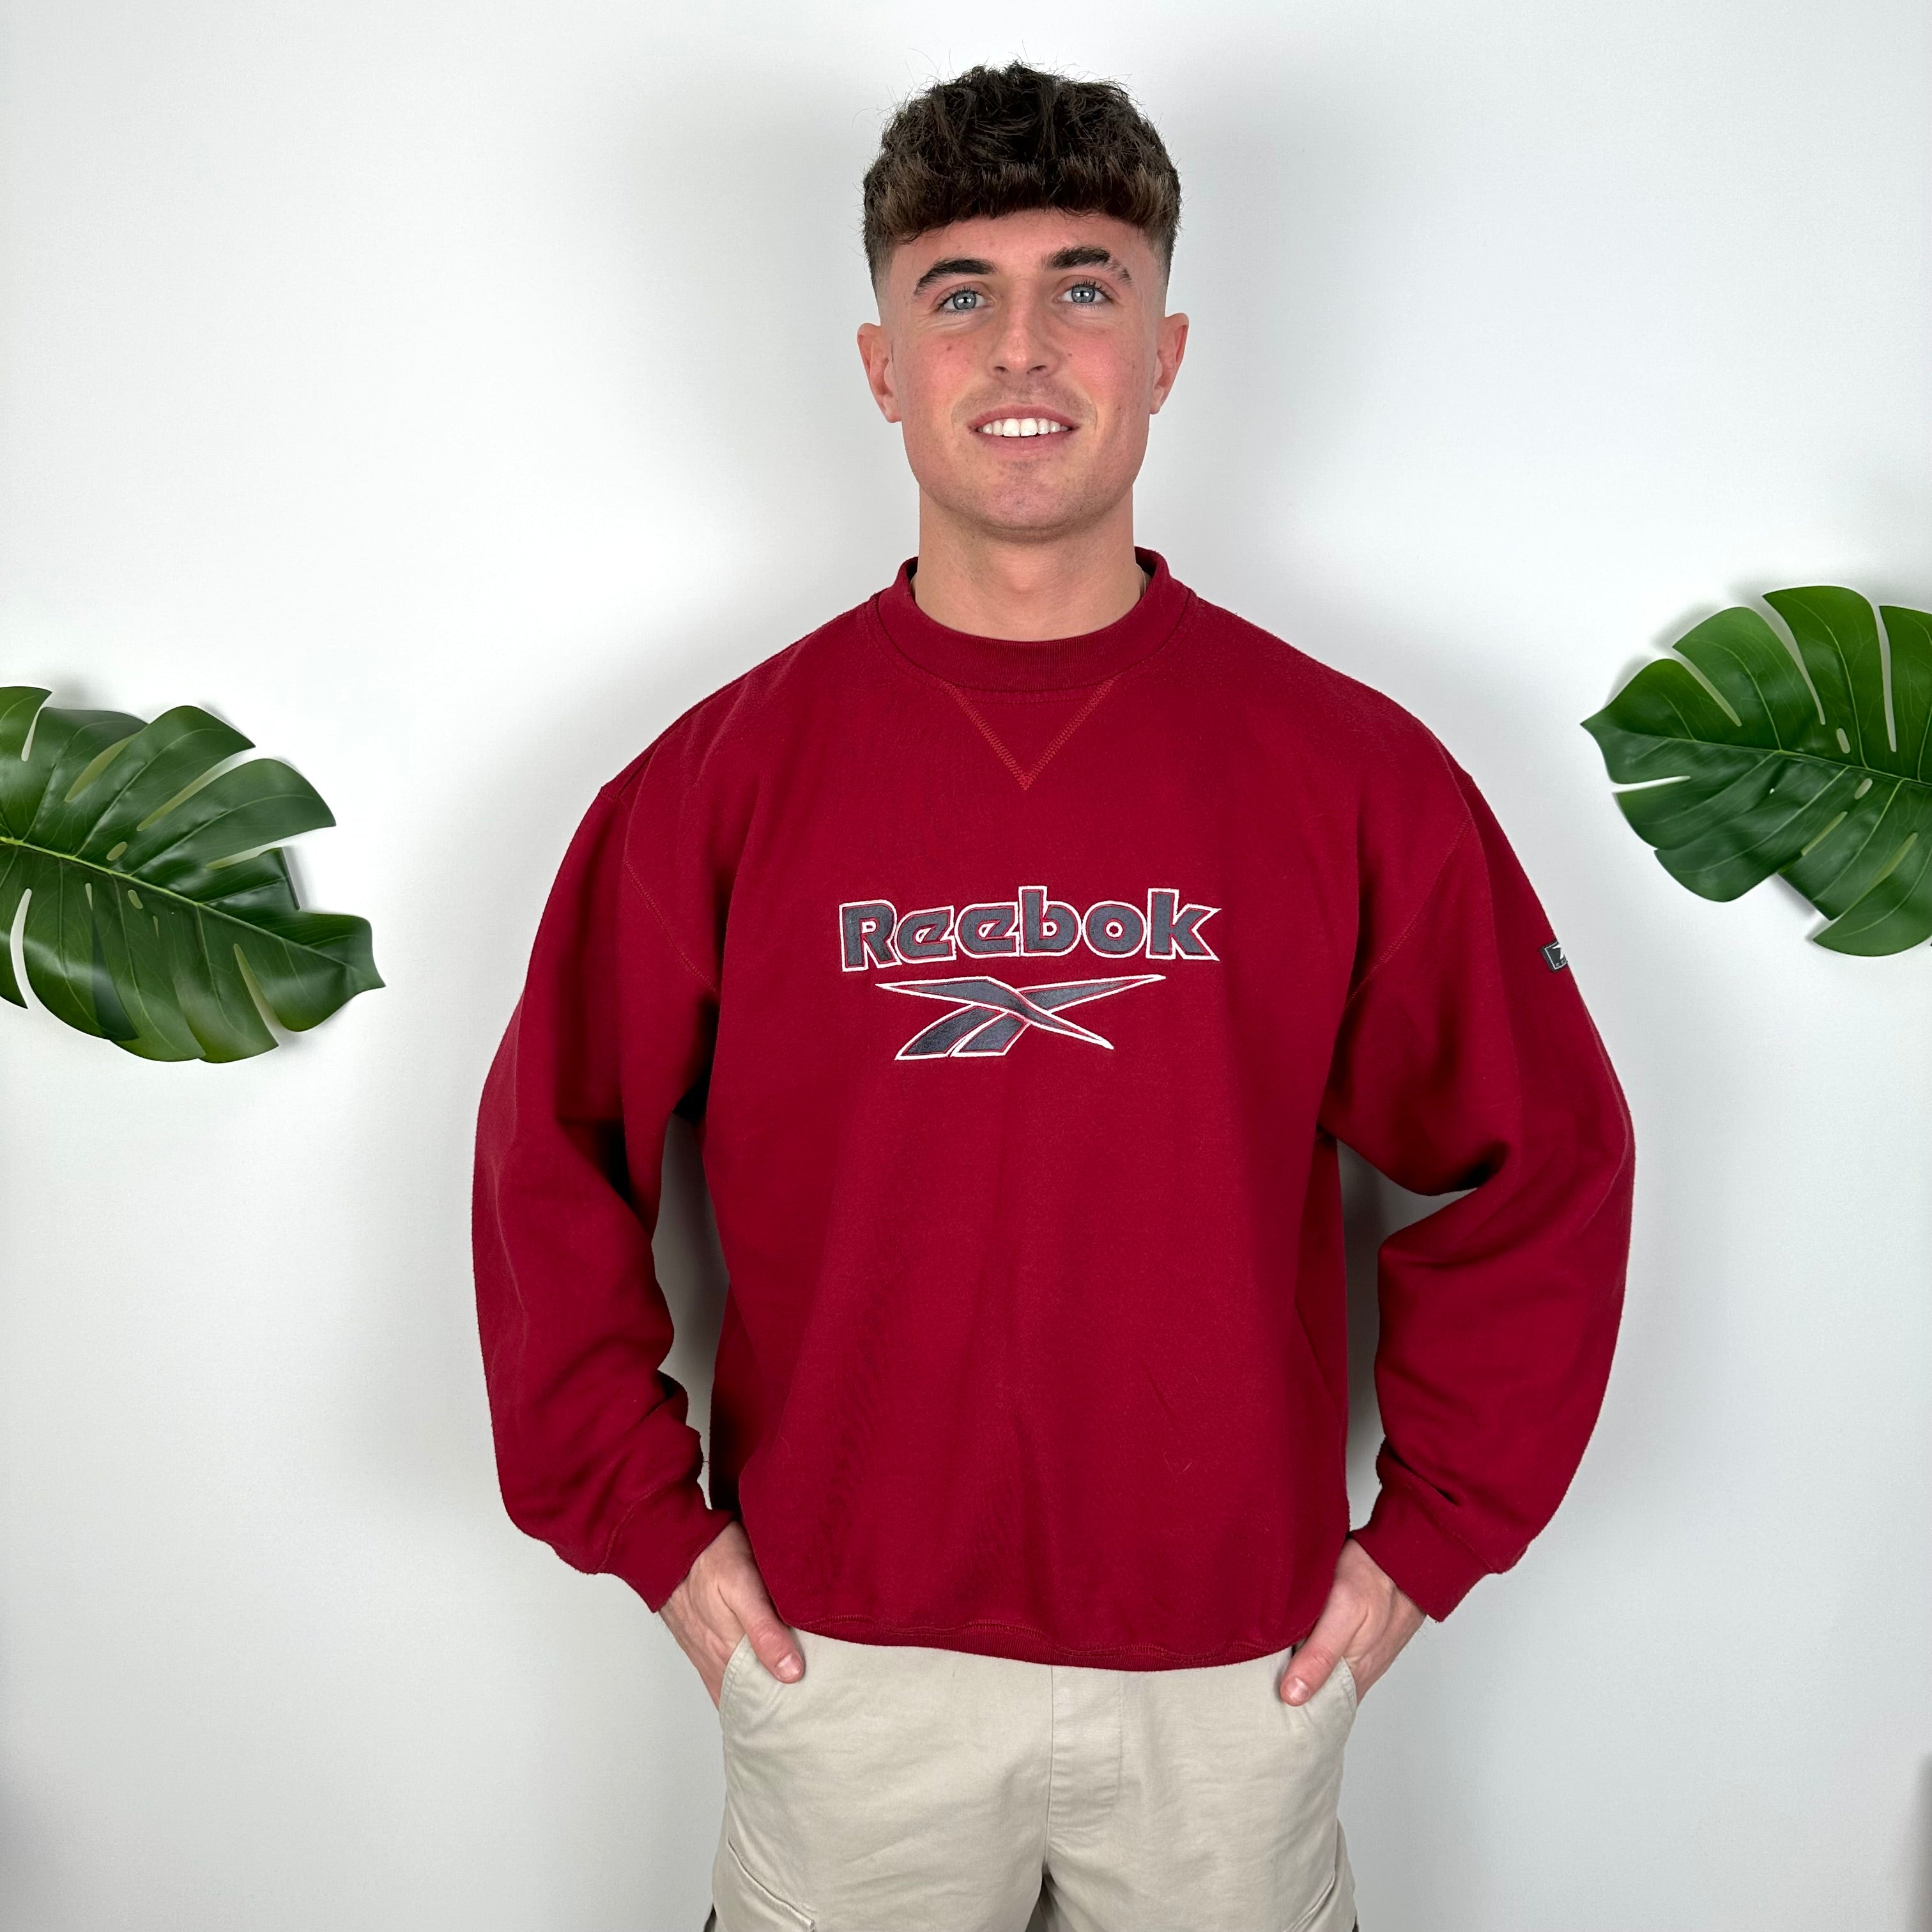 Reebok Red Embroidered Spell Out Sweatshirt (L)